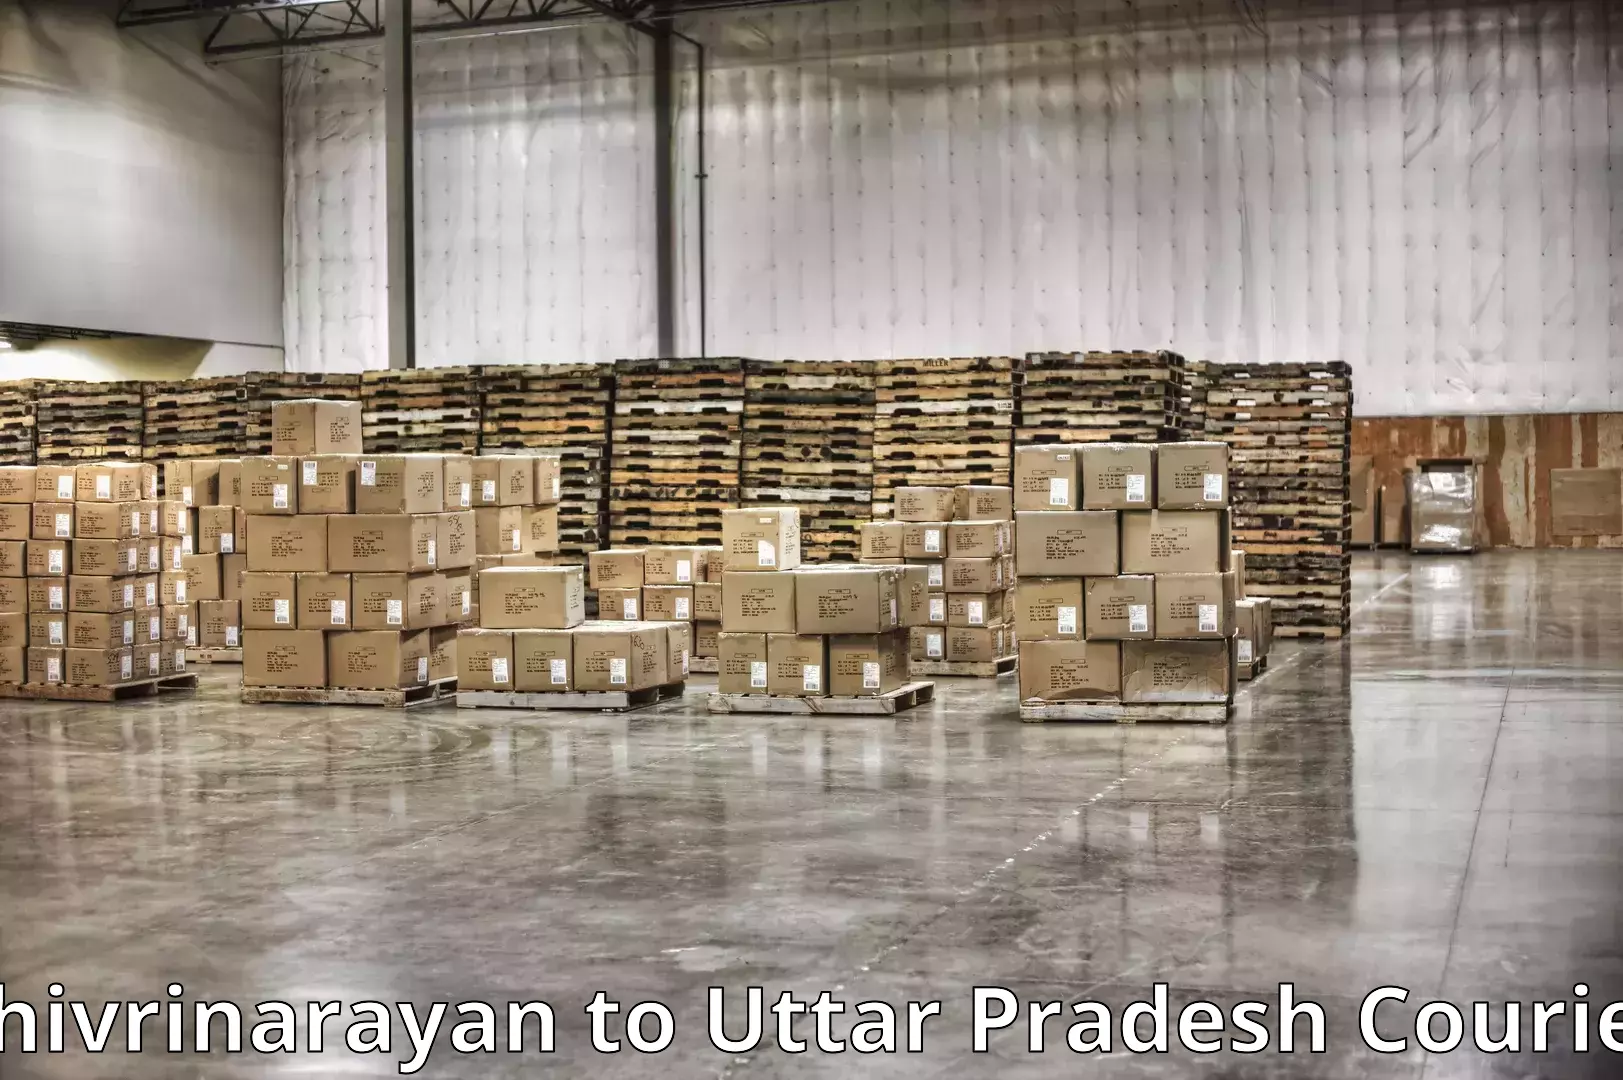 Professional moving assistance in Shivrinarayan to Kanpur